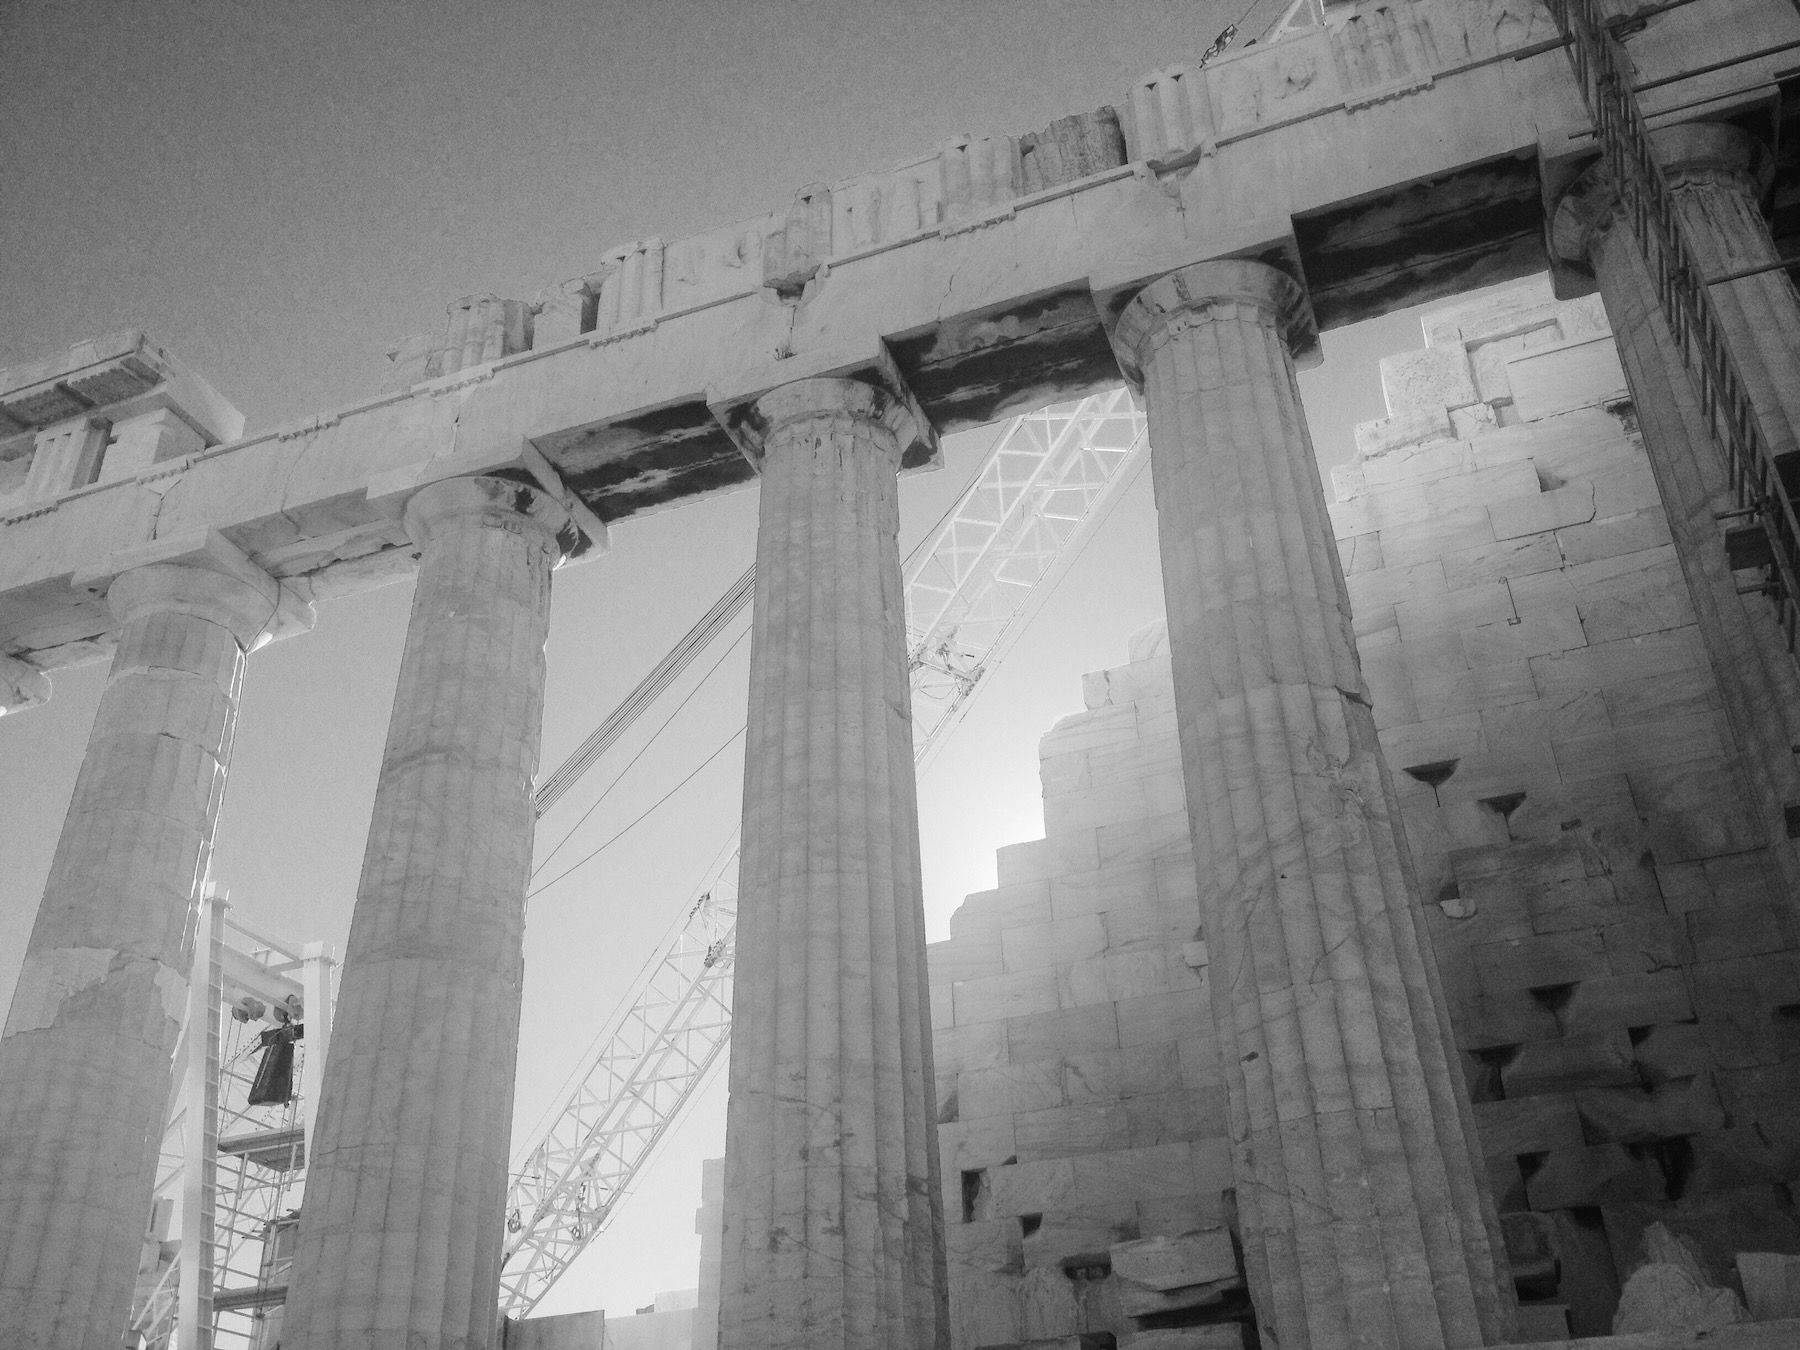 Black and white. Doric columns at the Parthenon, metal crane in background with glow of sun.